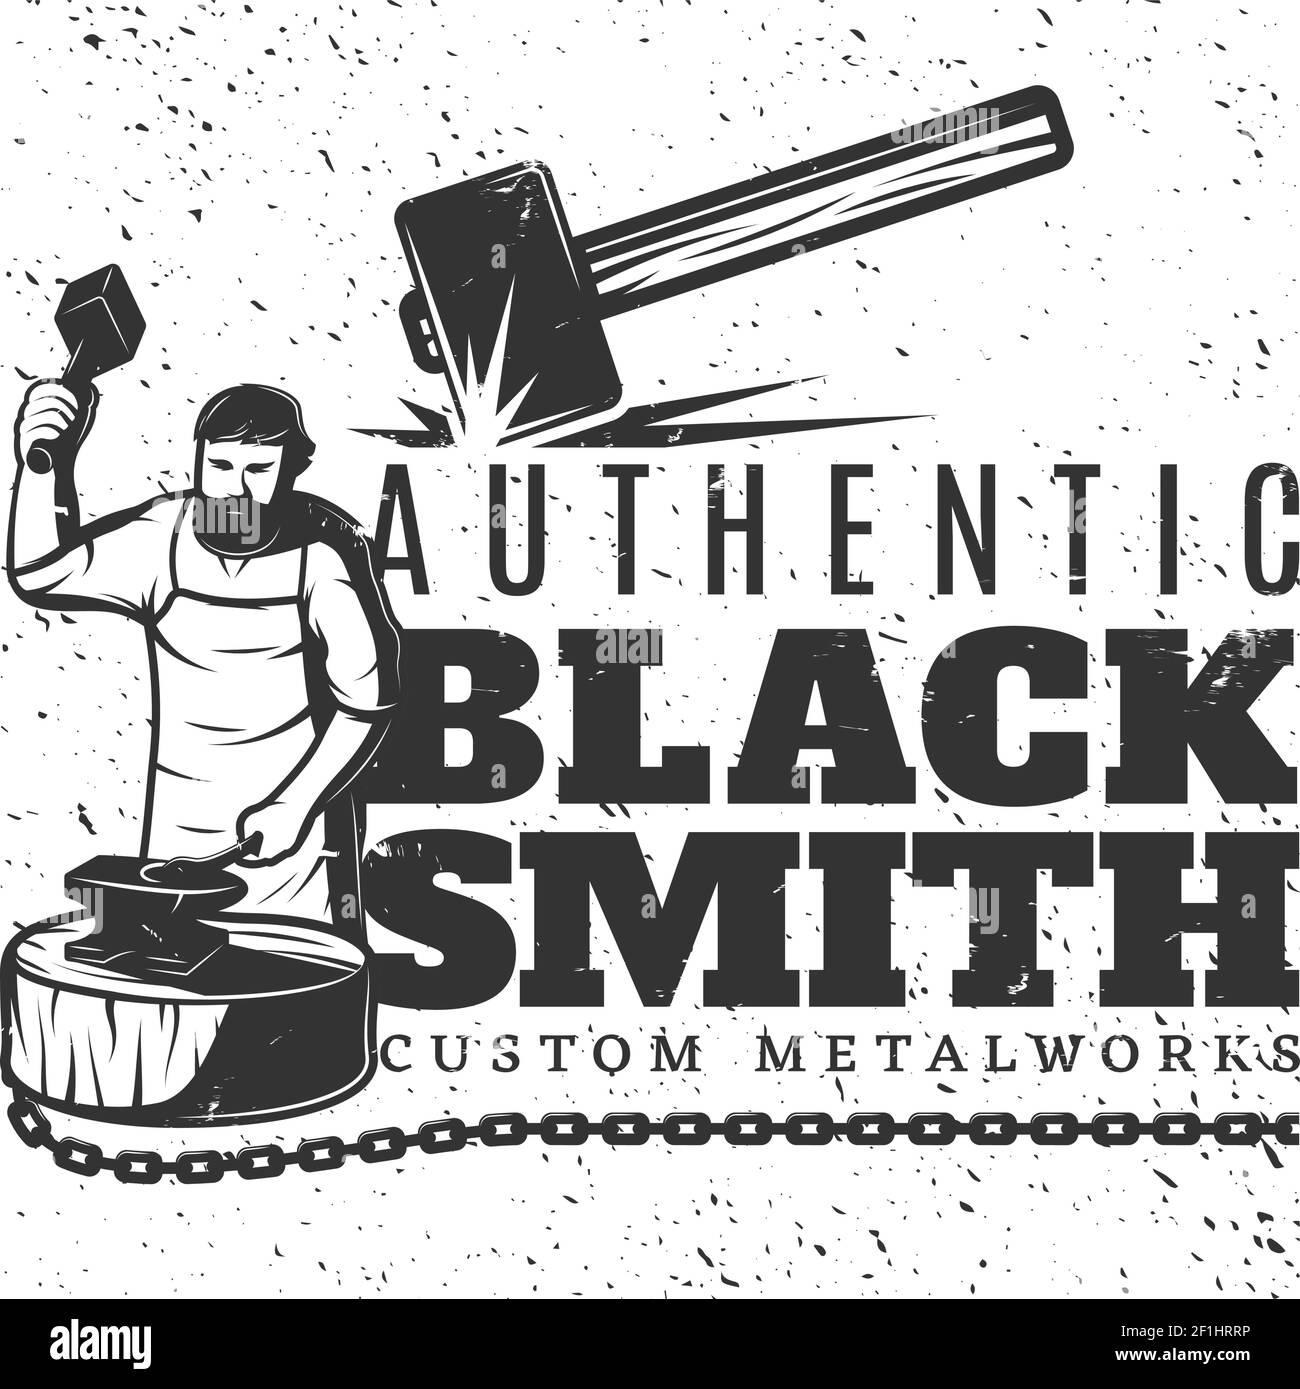 Monochrome vintage blacksmith template with metal chain bearded master holding sledgehammer and working on anvil vector illustration Stock Vector